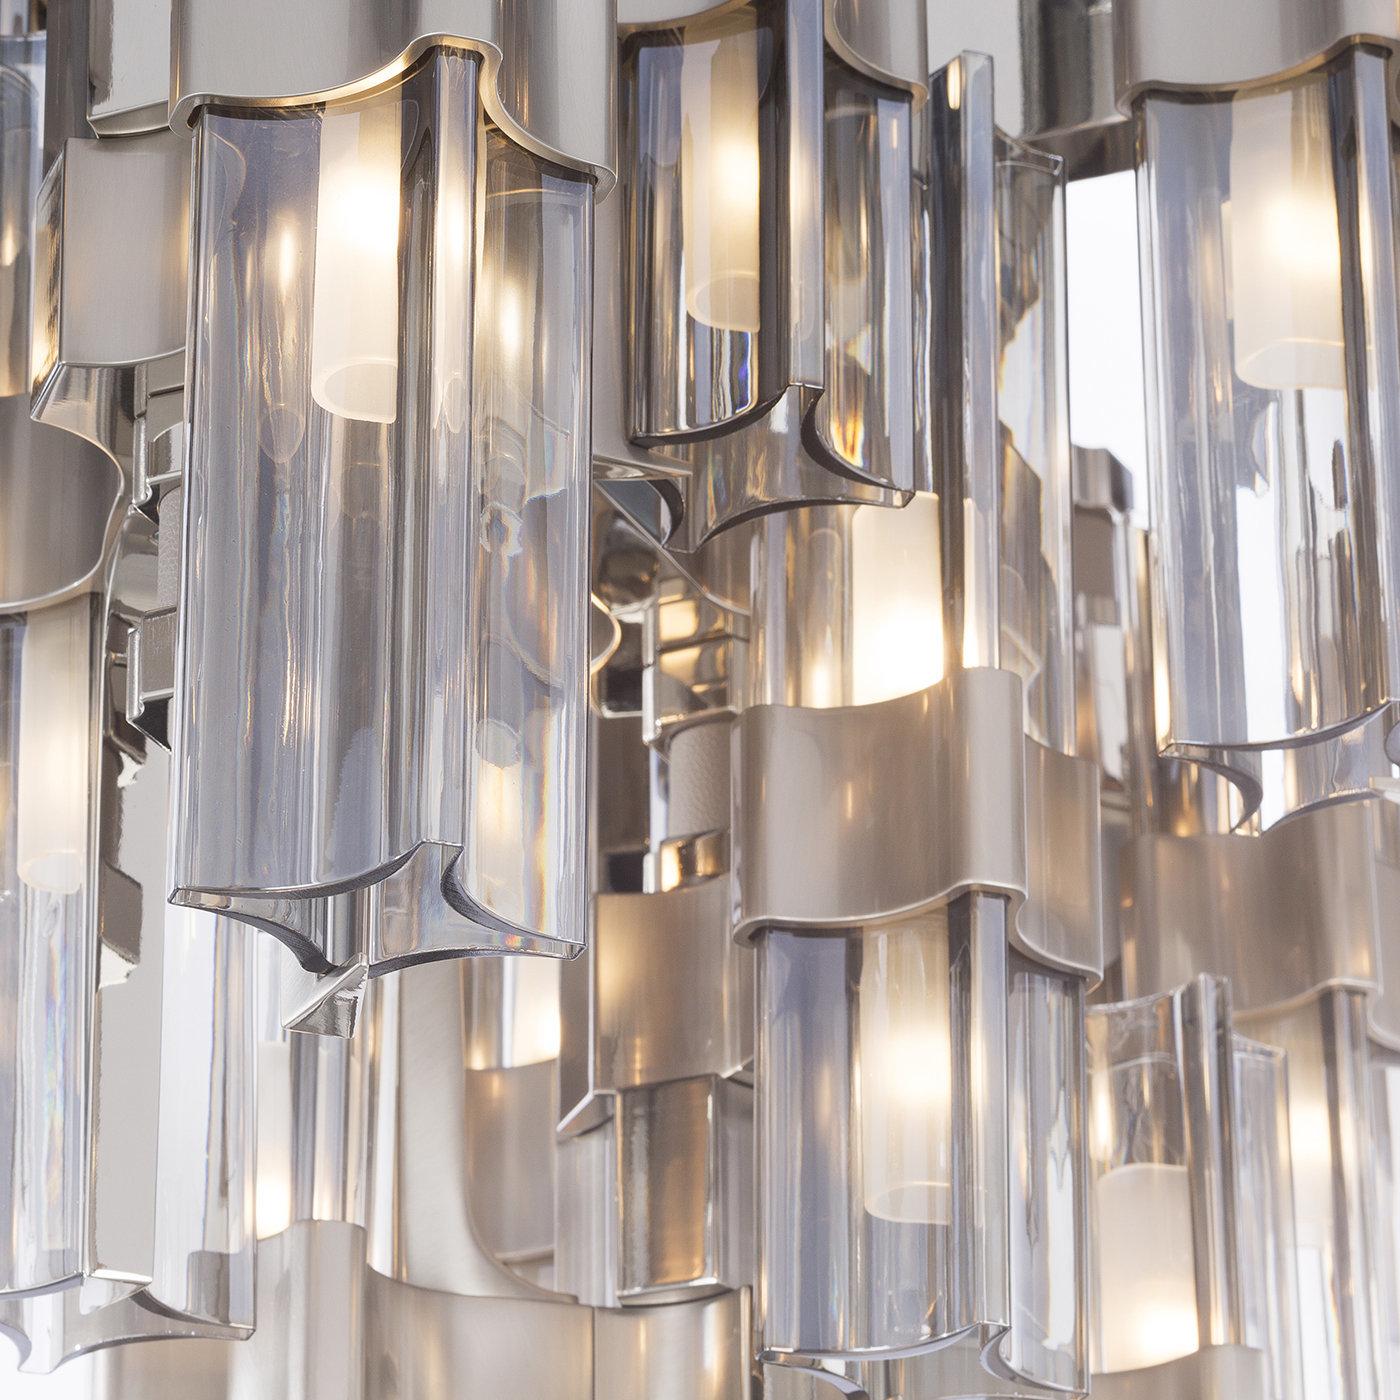 This pendant light gives off a futuristic vibe and will be a stunner when hung up in any room. Part of the Eterea collection, it hangs from a metal chain and has unique geometric lines and irregularly placed smoke-gray crystal shades that diffuse